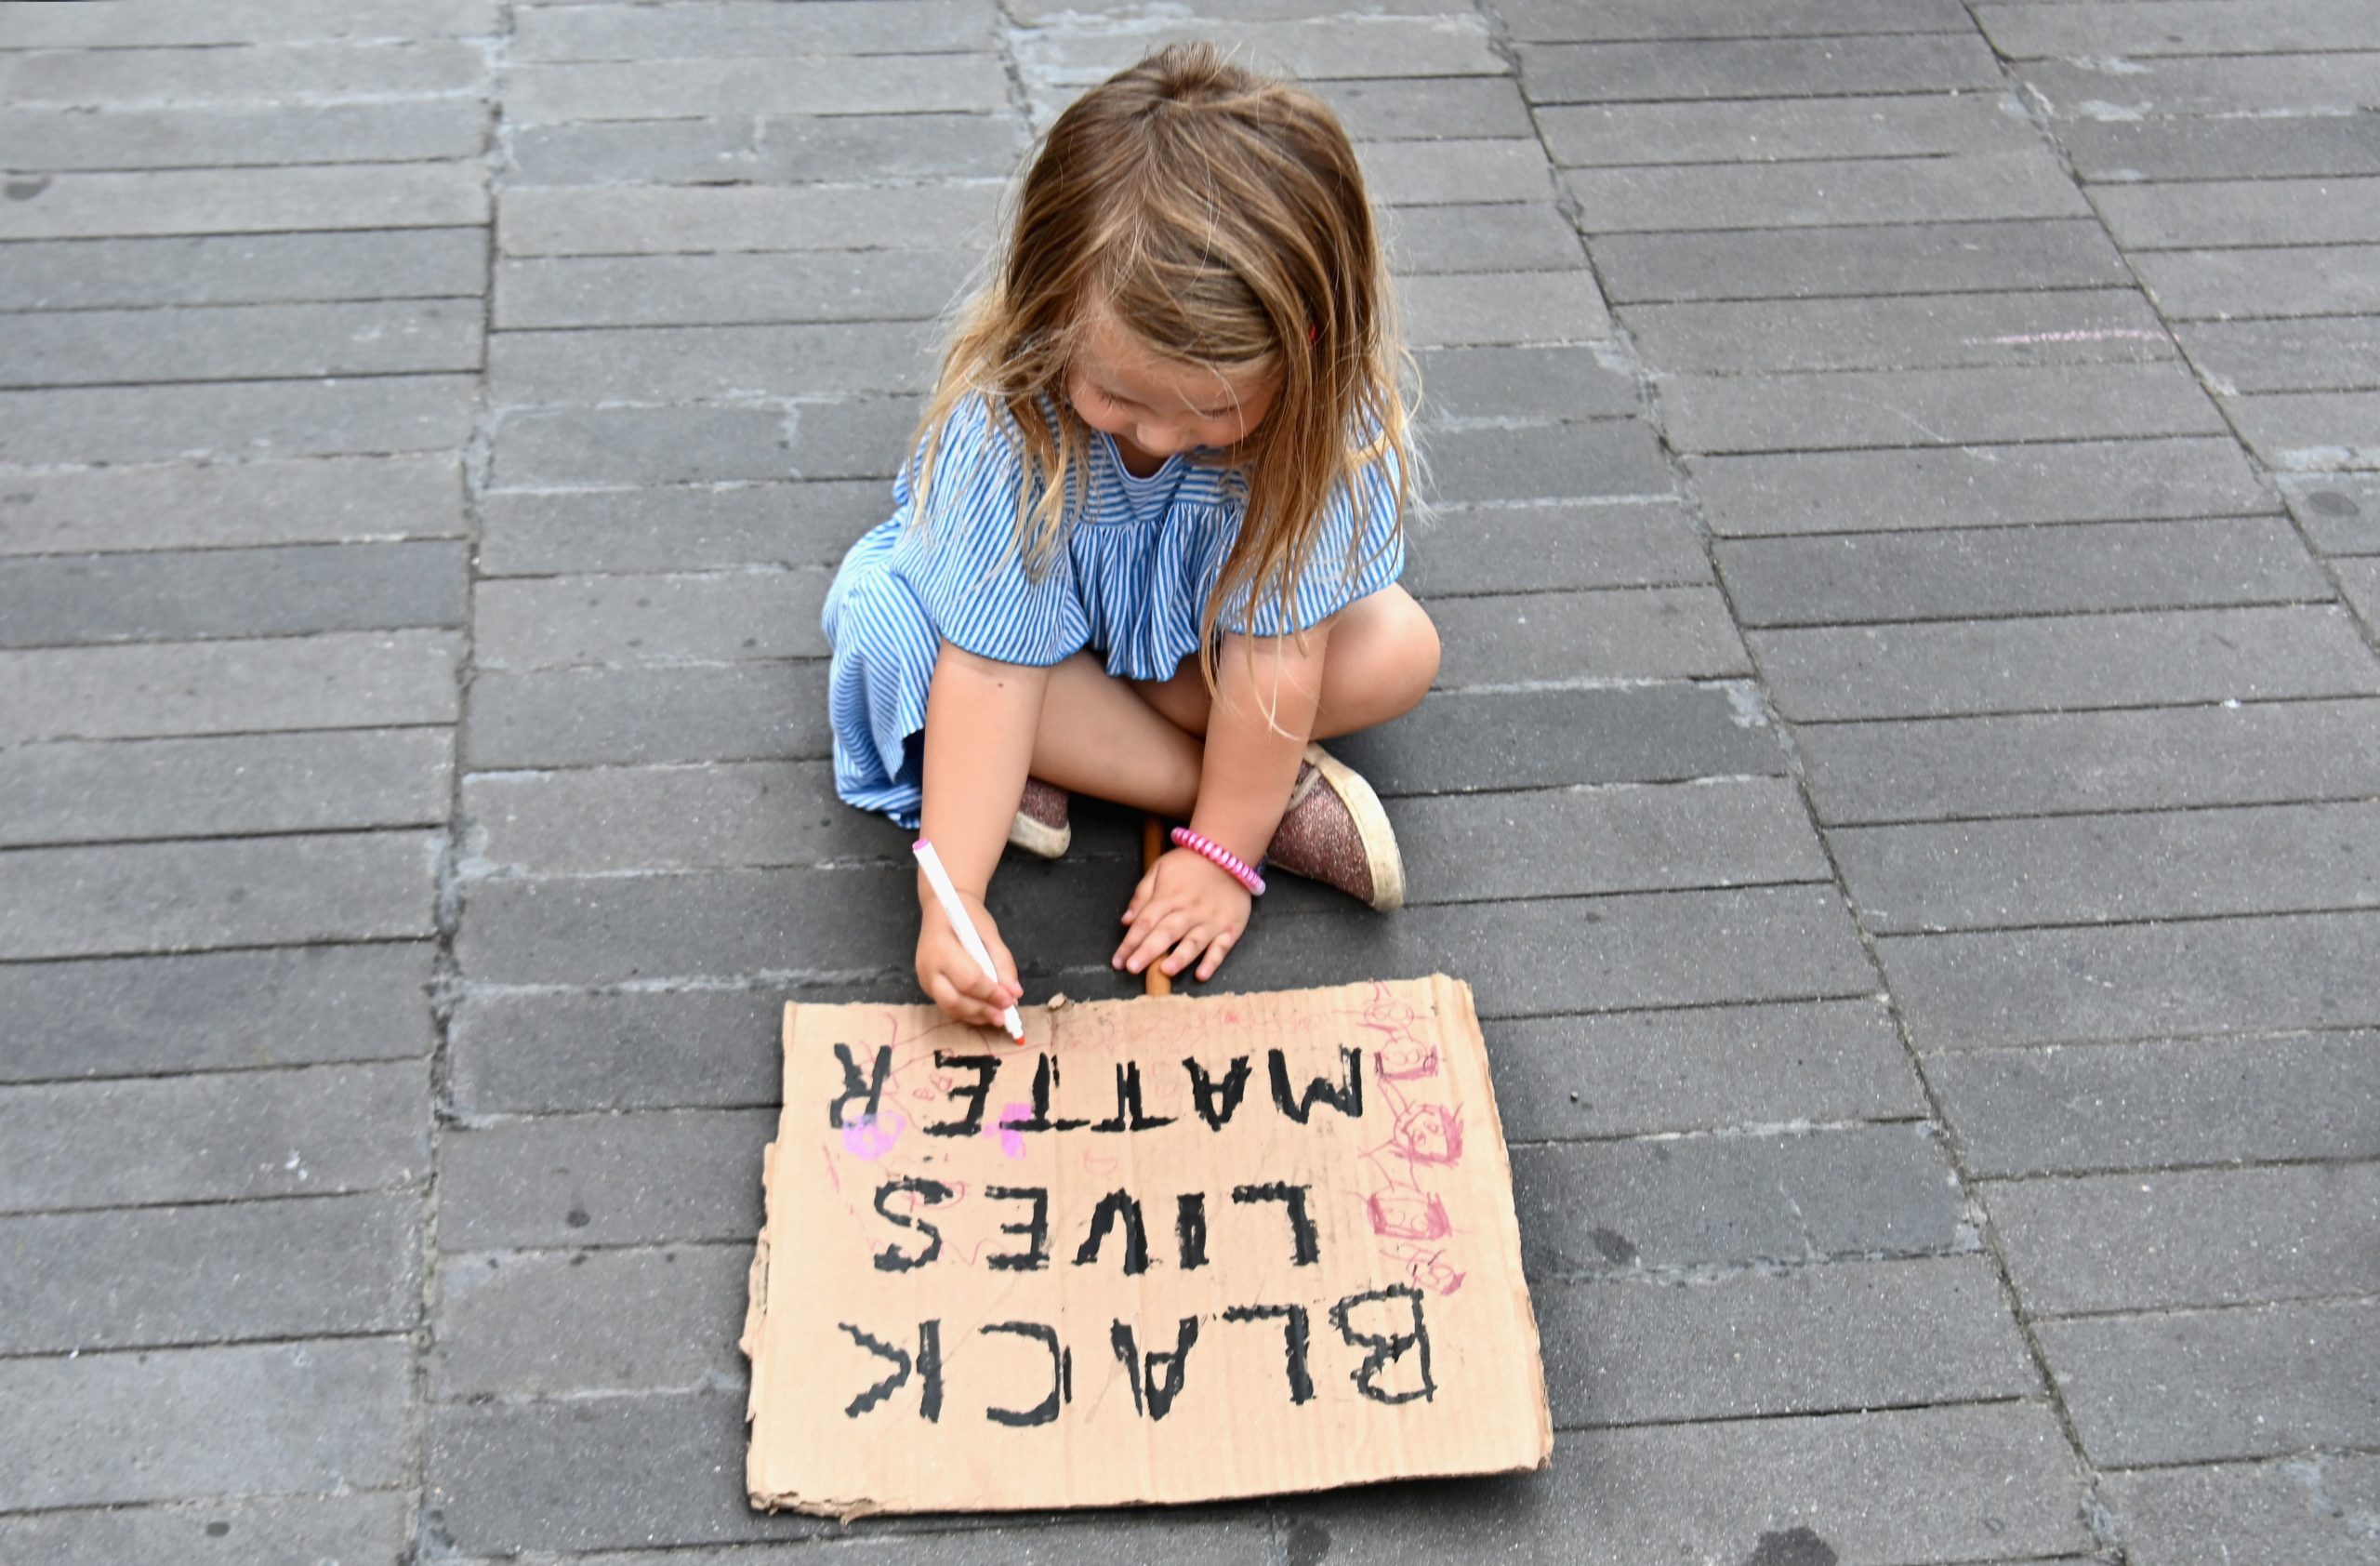 A child paints a sign as families participate in a children's march in solidarity with the Black Lives Matter movement and national protests against police brutality on June 9, 2020 in the Brooklyn Borough of New York City. - George Floyd will be laid to rest Tuesday in his Houston hometown, the culmination of a long farewell to the 46-year-old African American whose death in custody ignited global protests against police brutality and racism.Thousands of well-wishers filed past Floyd's coffin in a public viewing a day earlier, as a court set bail at $1 million for the white officer charged with his murder last month in Minneapolis. (Photo by Angela Weiss / AFP) (Photo by ANGELA WEISS/AFP via Getty Images)